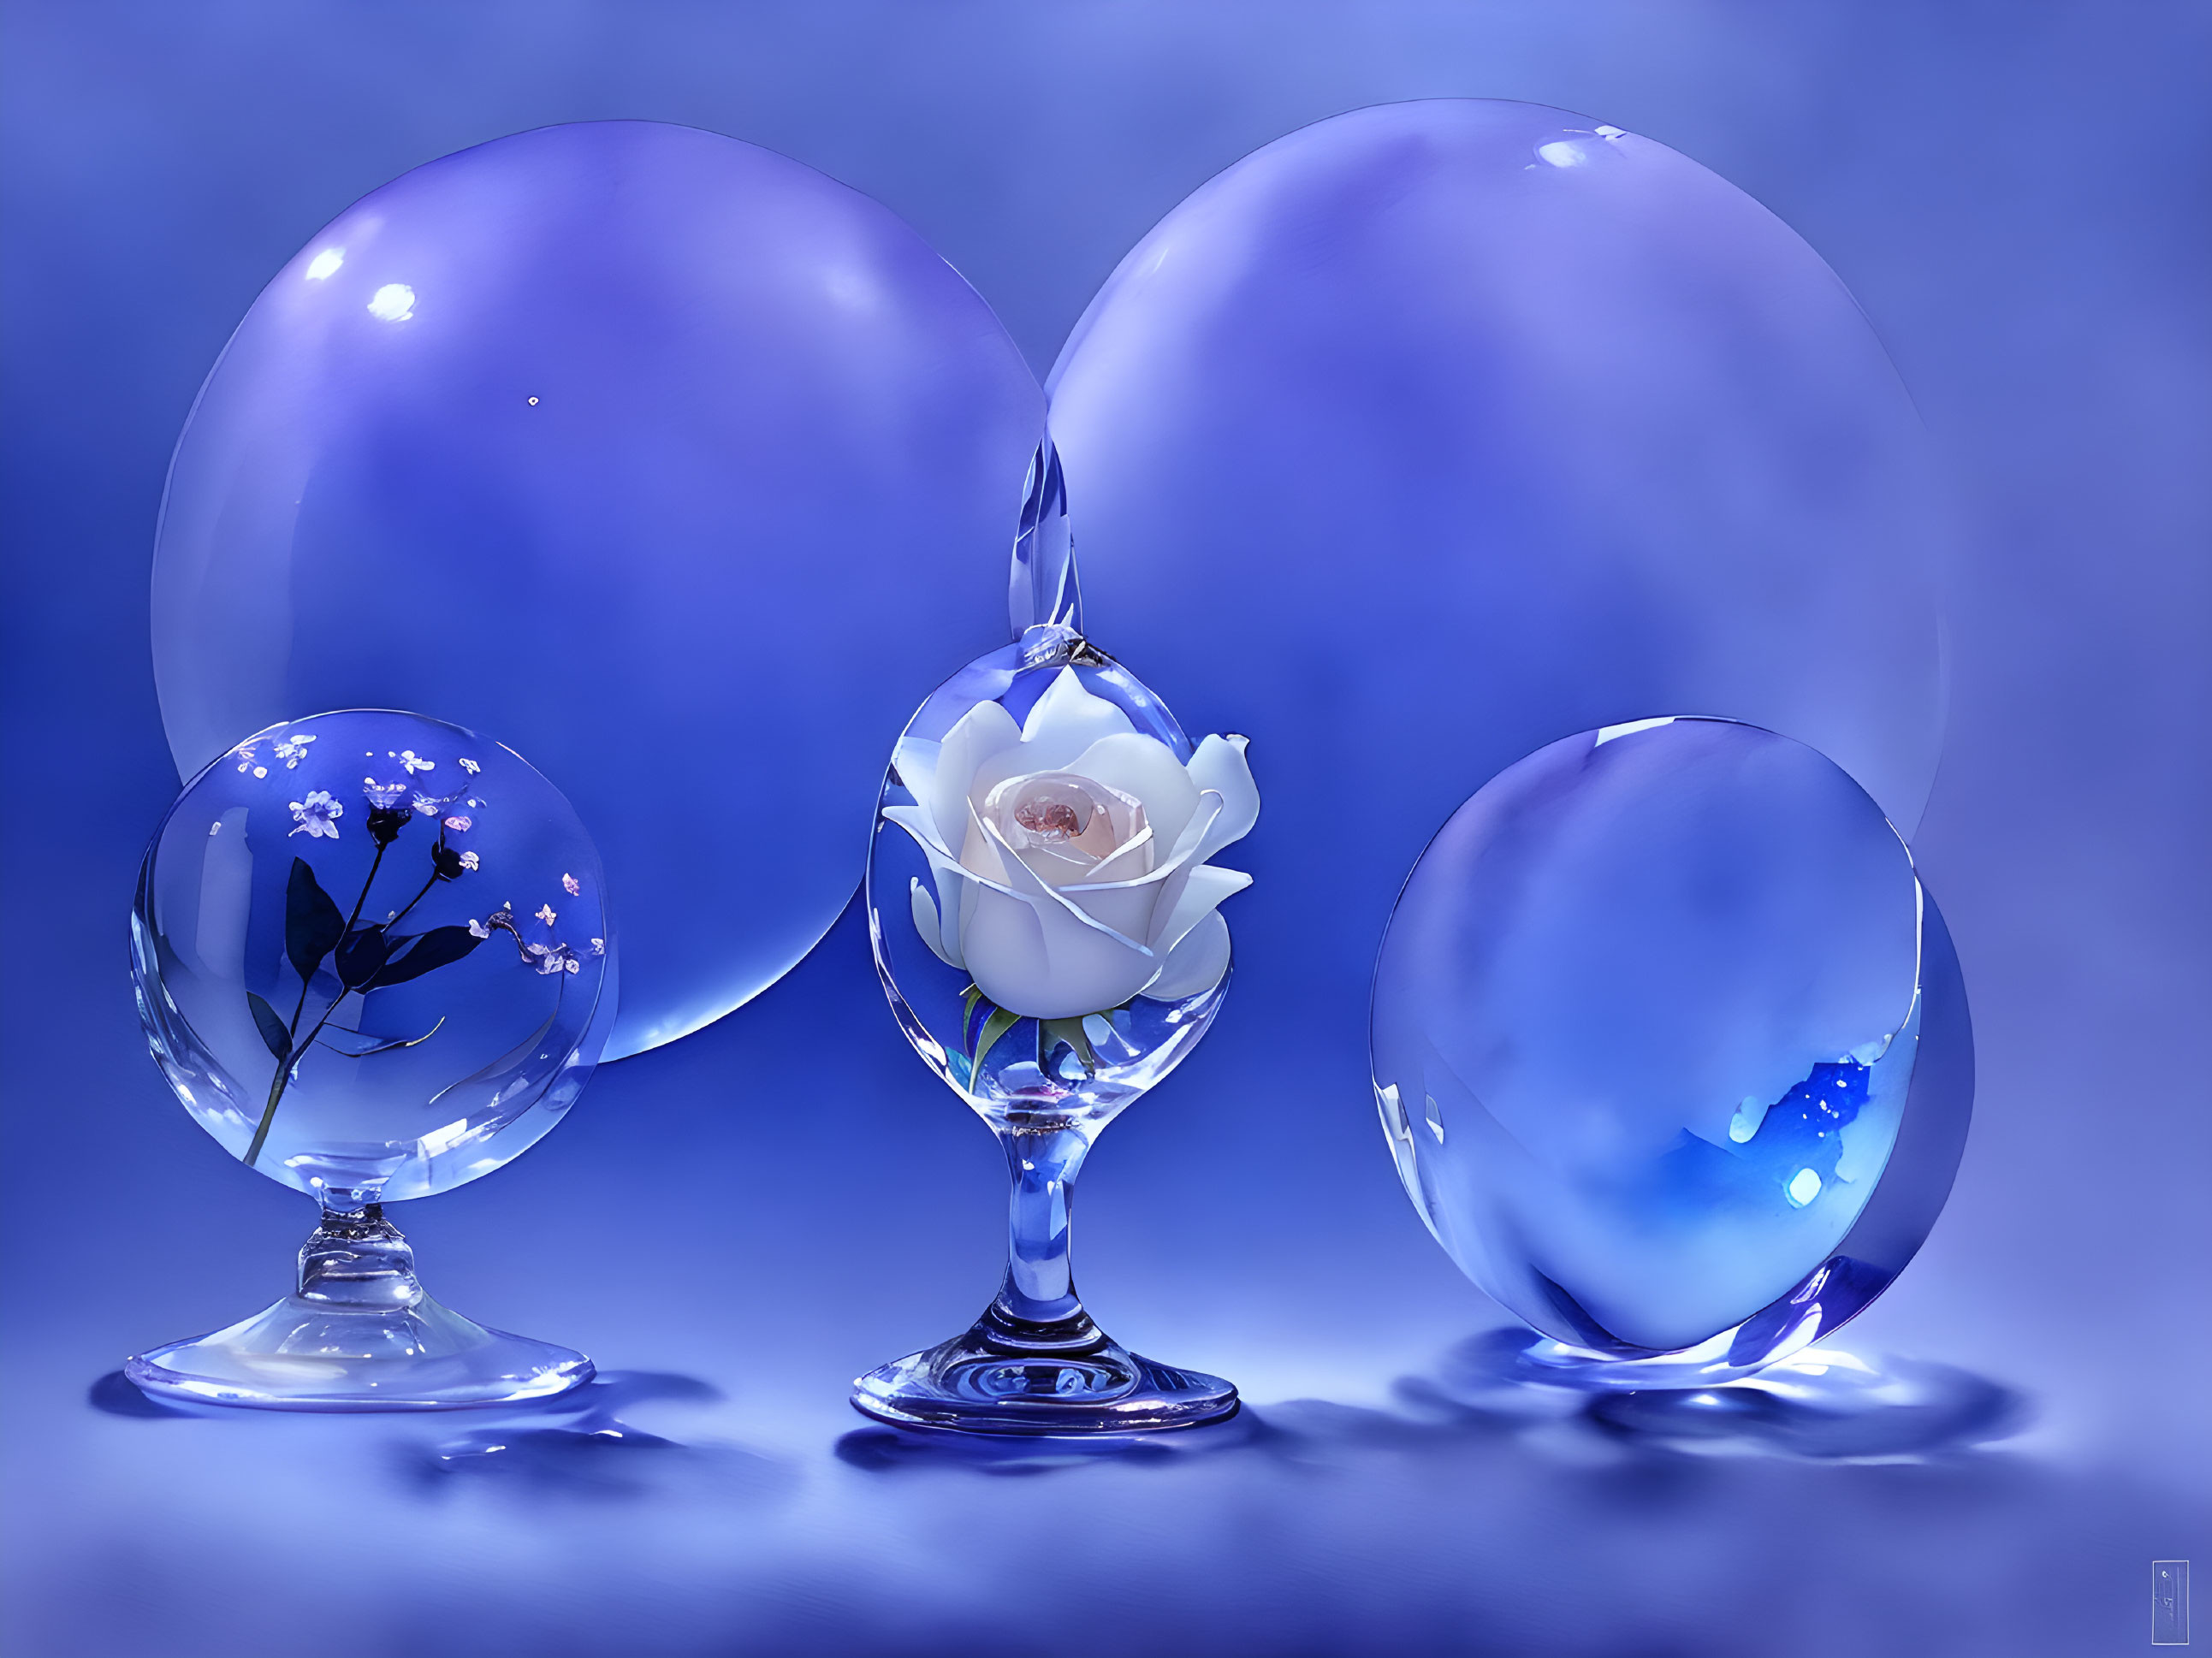 Blue Spheres and Rose Glass Artistry